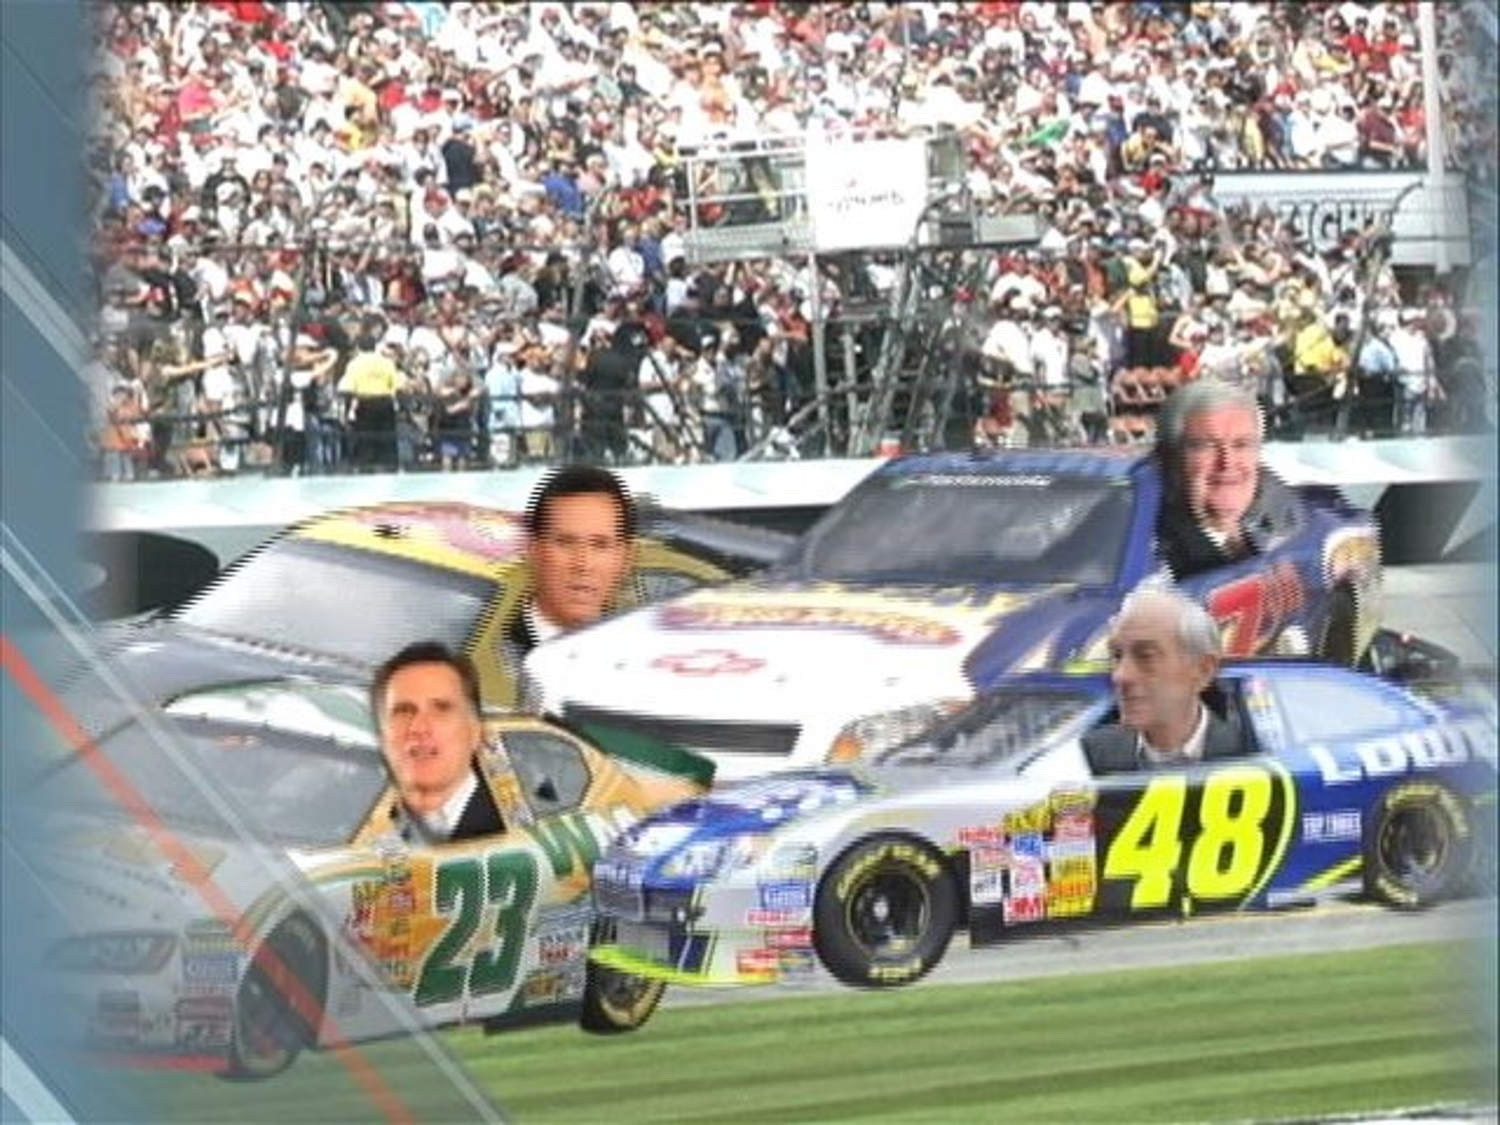 GOP drag race takes on NASCAR proportions